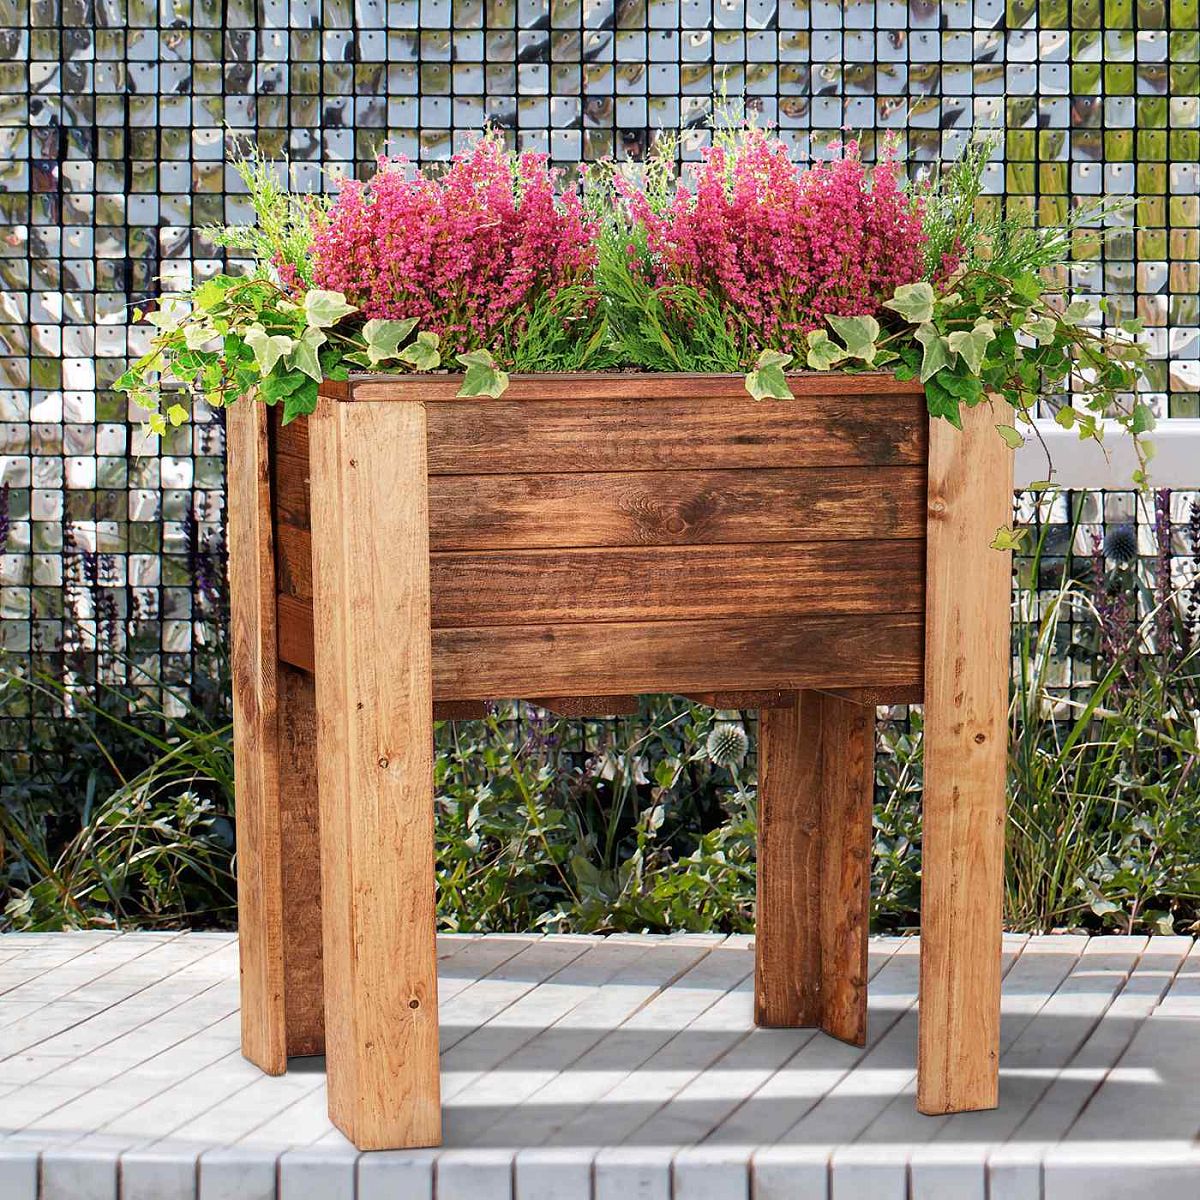 Rustic Scandinavian Redwood Raised Bed Outdoor Planter on Legs Made in UK by HORTICO